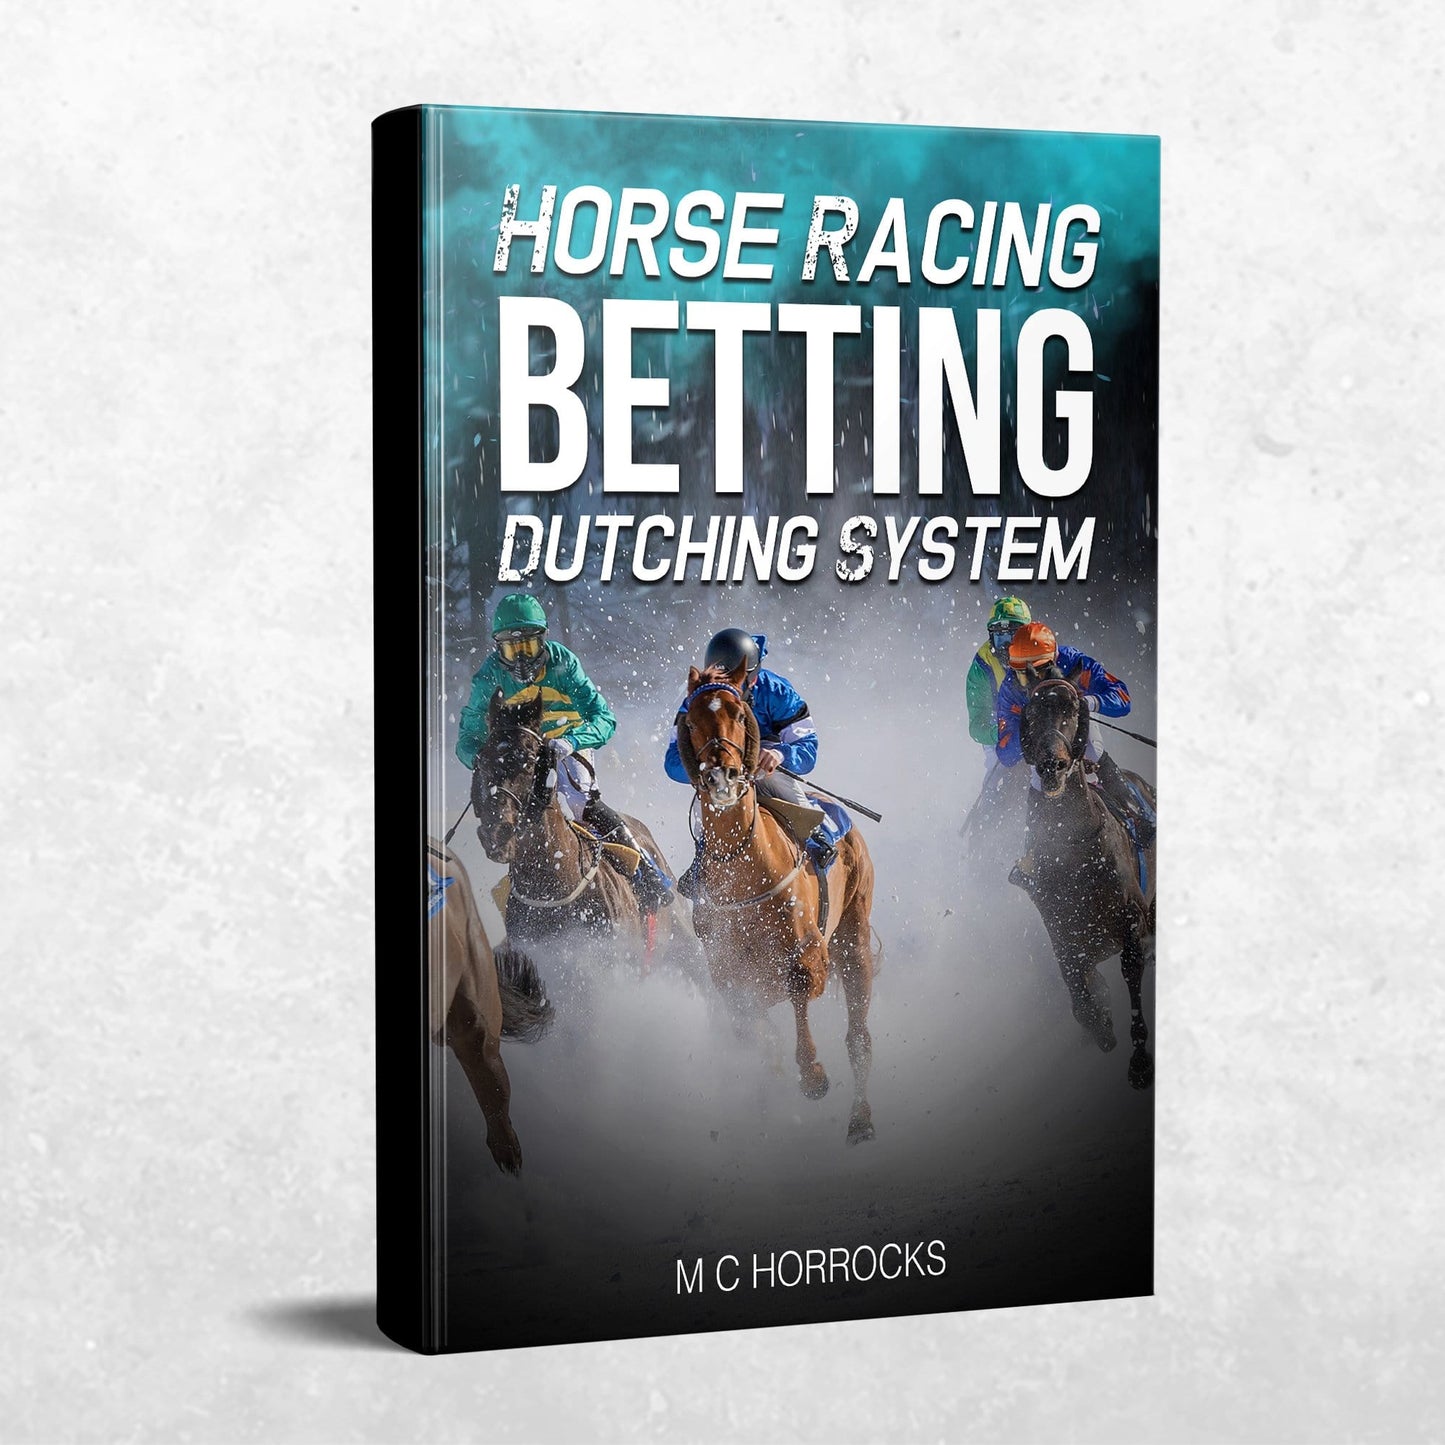 Horse Racing Betting Dutching System : Dutching Systems Horse Racing